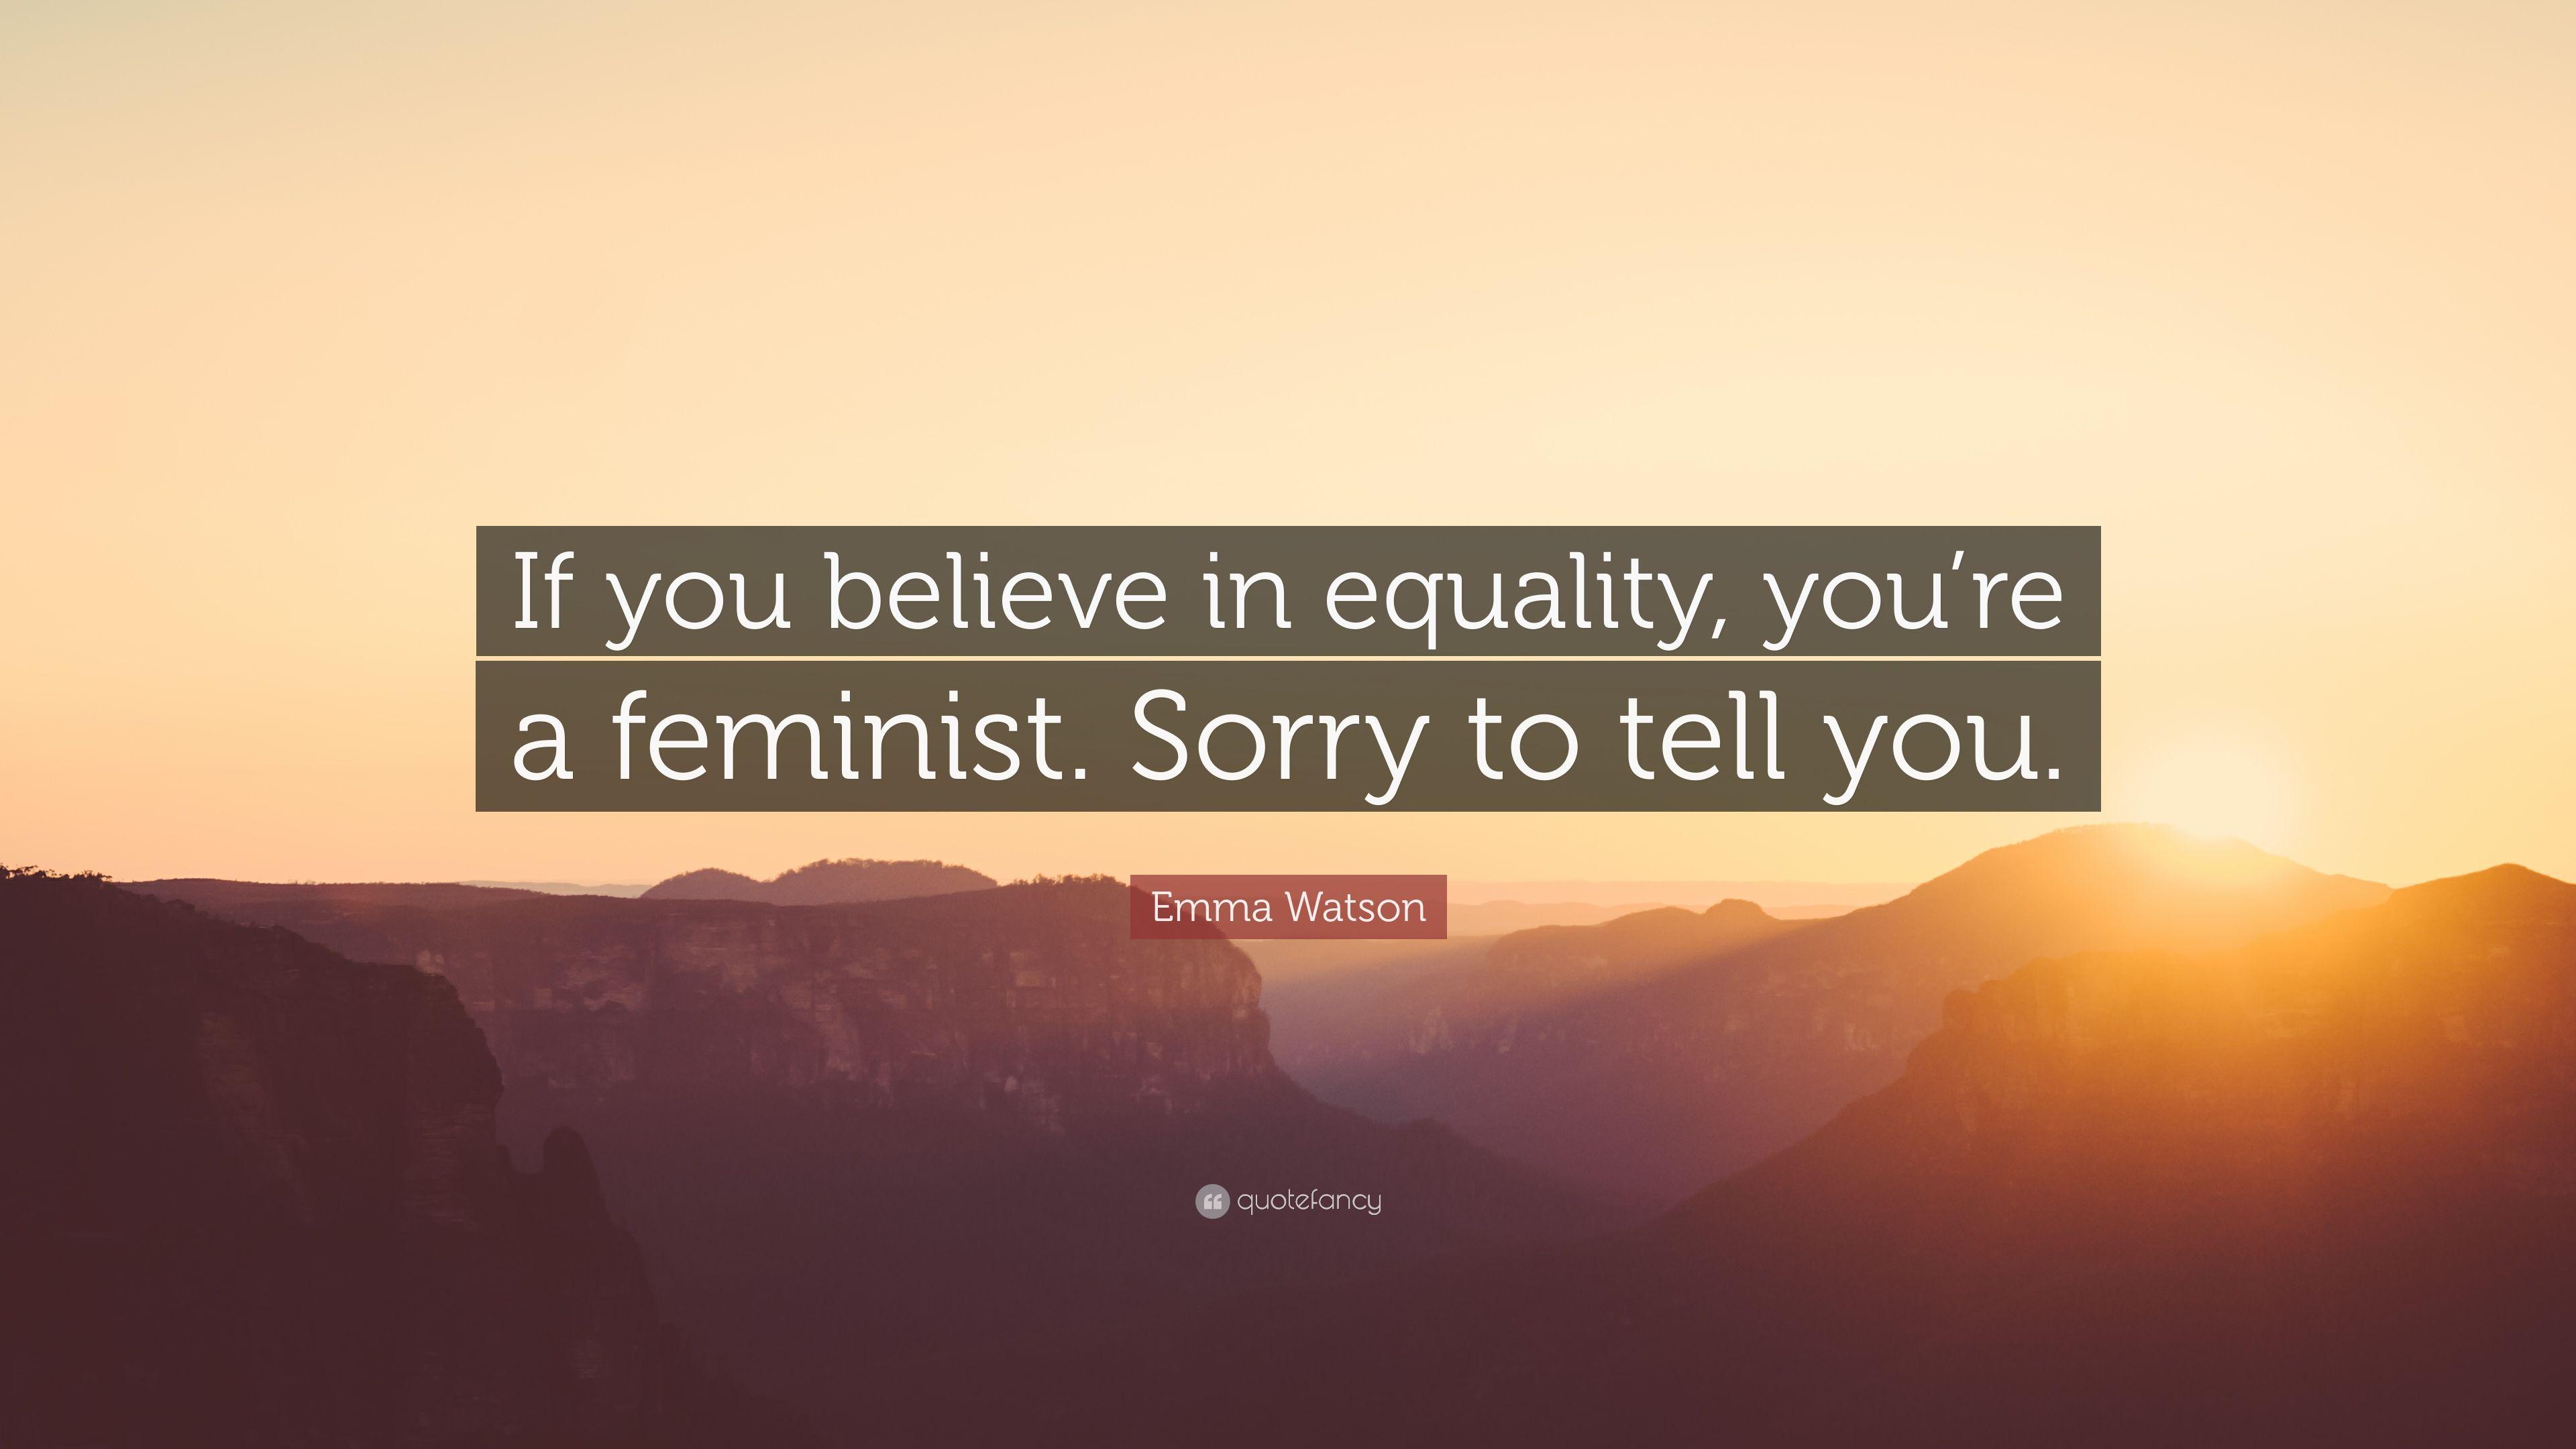 Emma Watson Quote: “If you believe in equality, you're a feminist